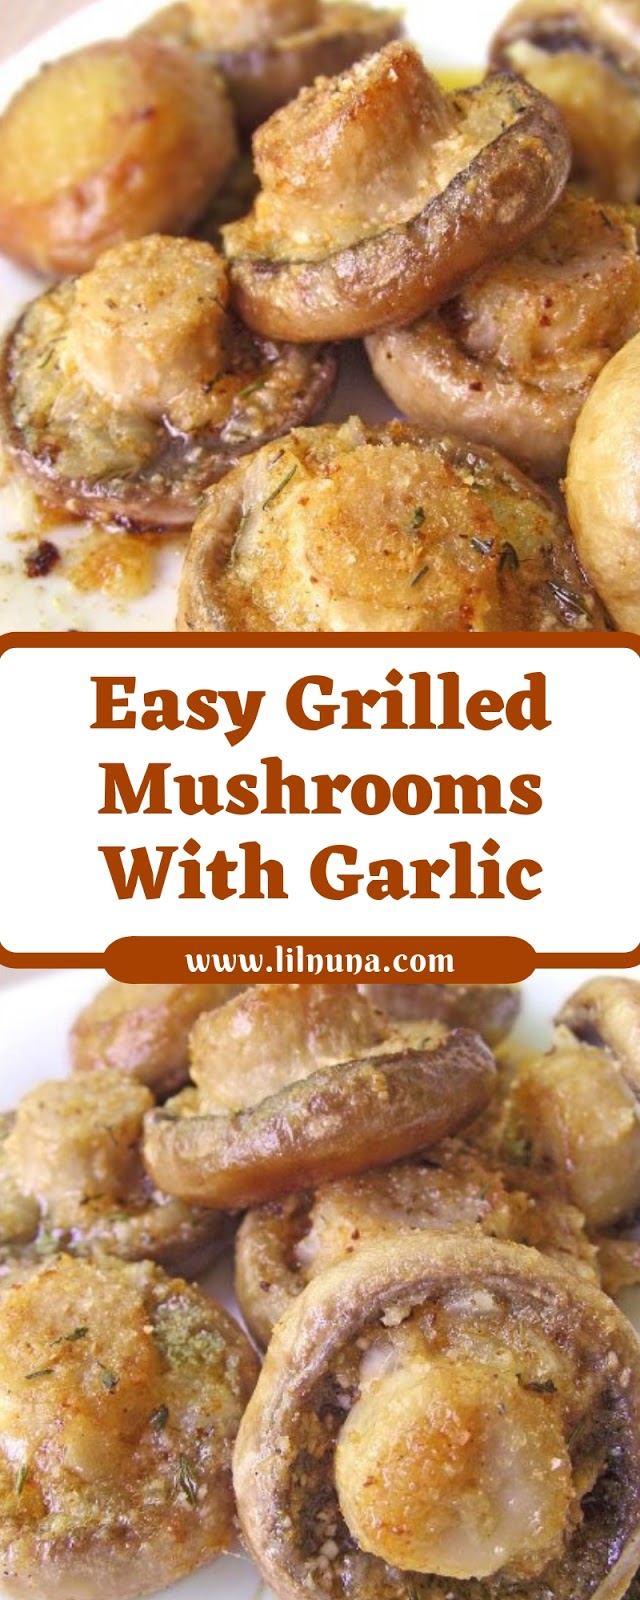 Easy Grilled Mushrooms With Garlic